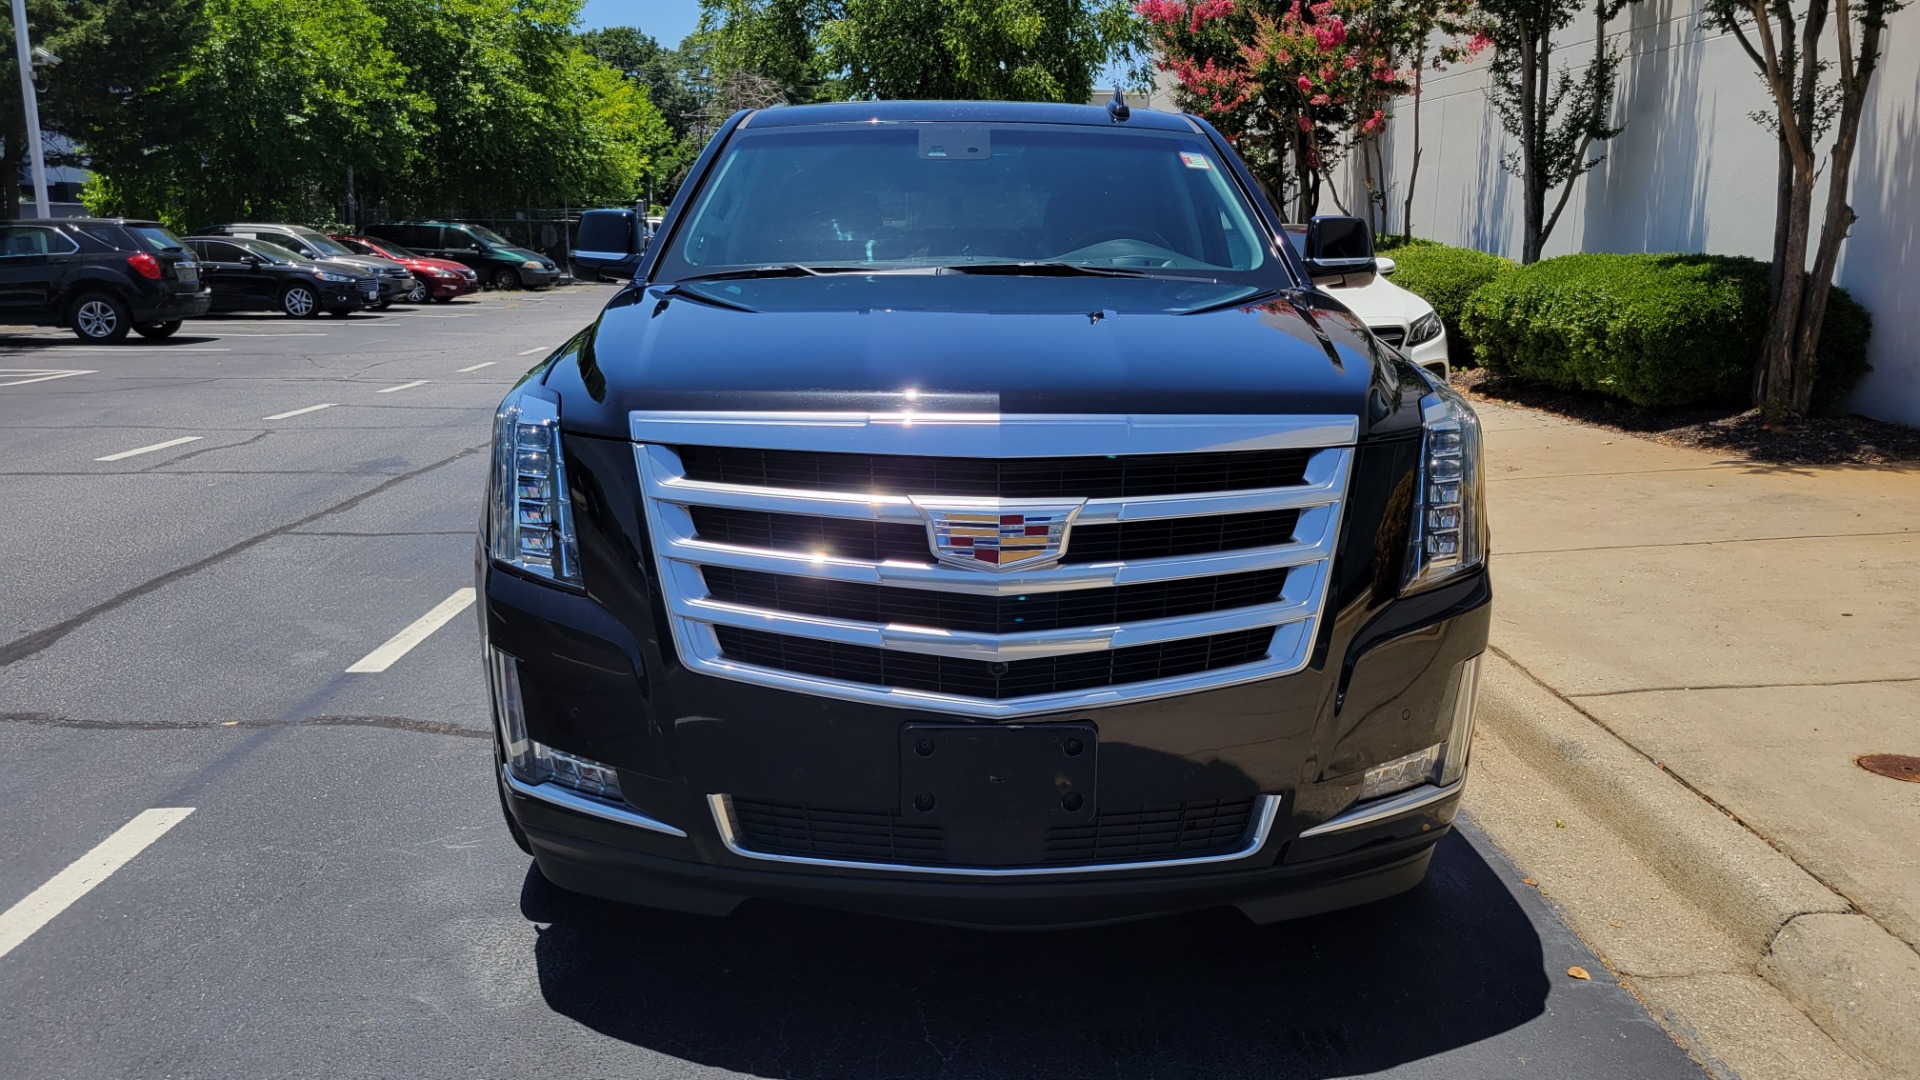 Used 2016 Cadillac ESCALADE PREMIUM COLLECTION / 6.2L / 4X4 / NAV / DVD / SUNROOF / 3-ROW for sale $58,995 at Formula Imports in Charlotte NC 28227 27